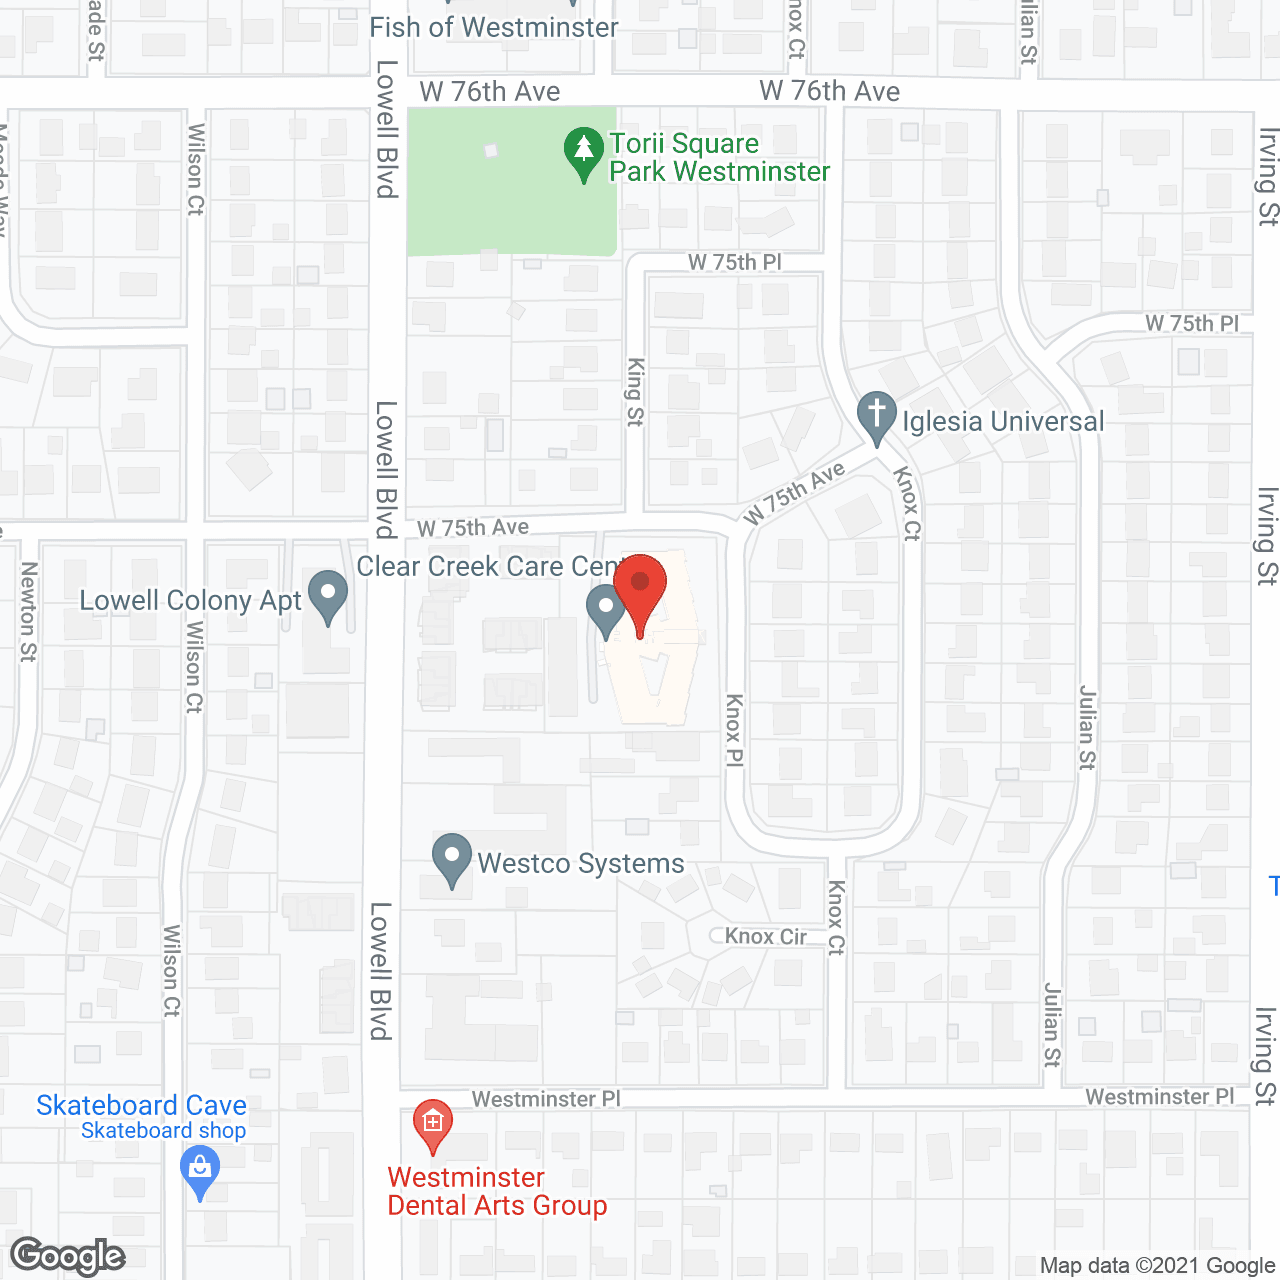 Clear Creek Care Center in google map